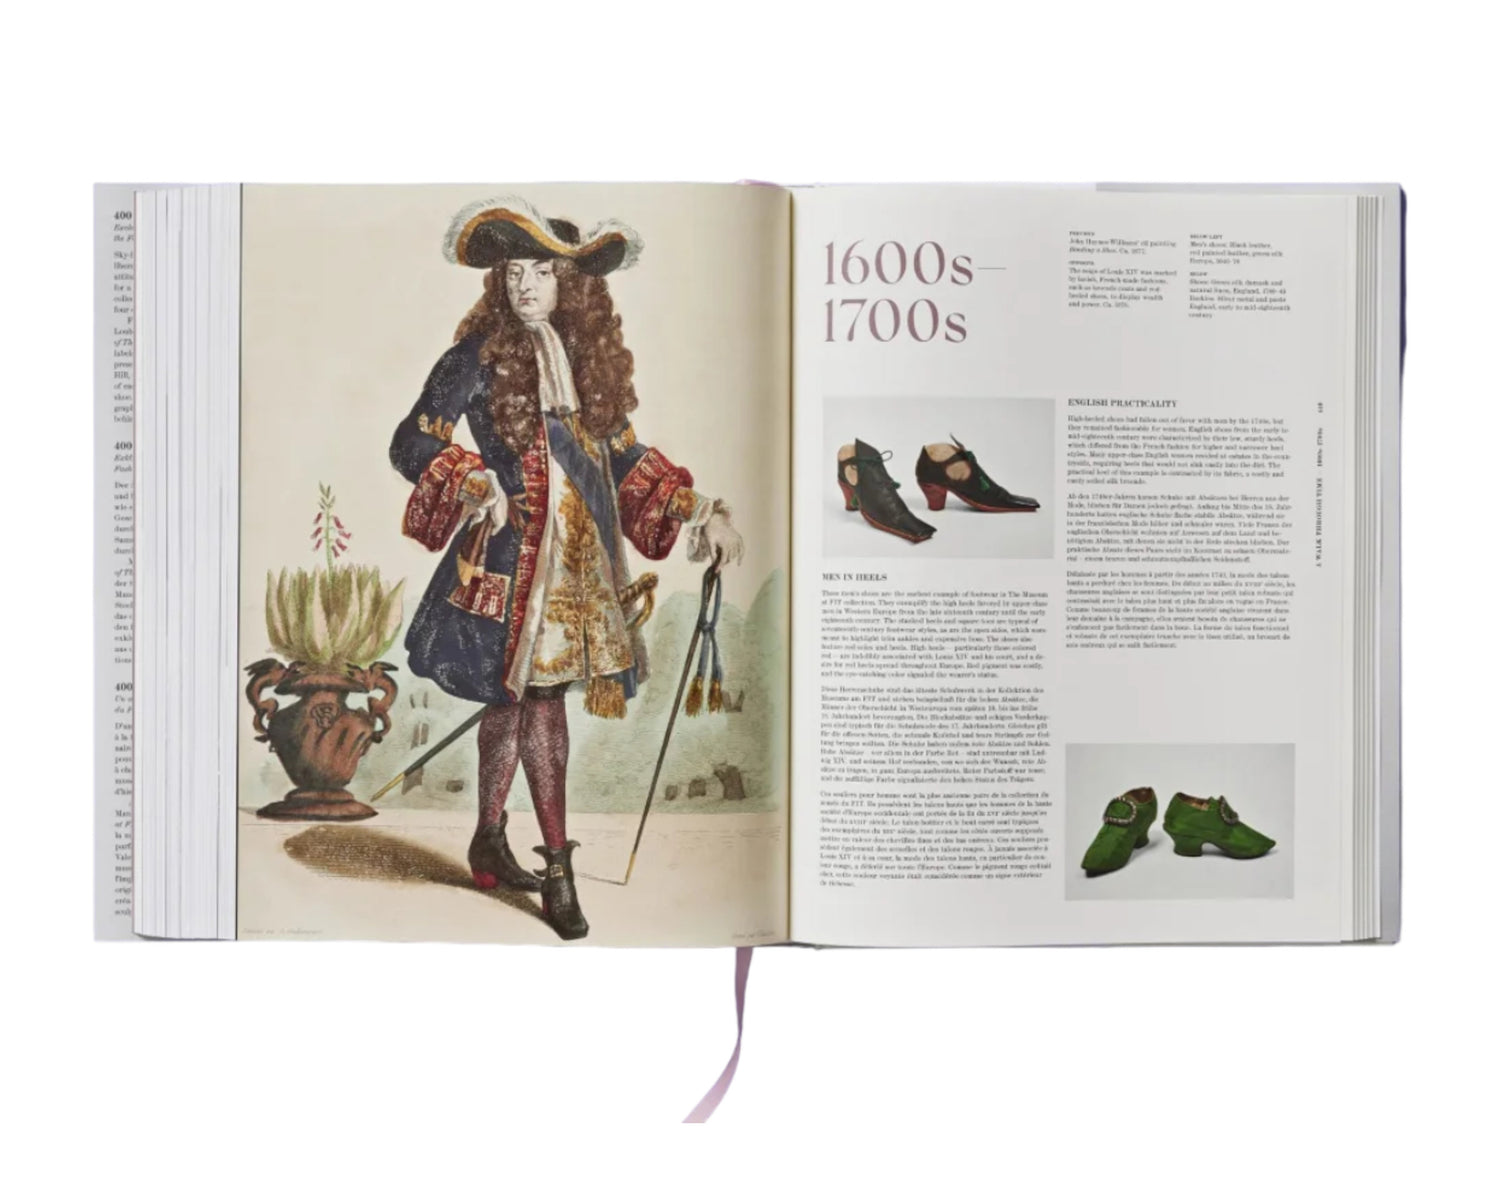 Taschen Books - Shoes A-Z. The Collection of The Museum at FIT Hard Cover Book